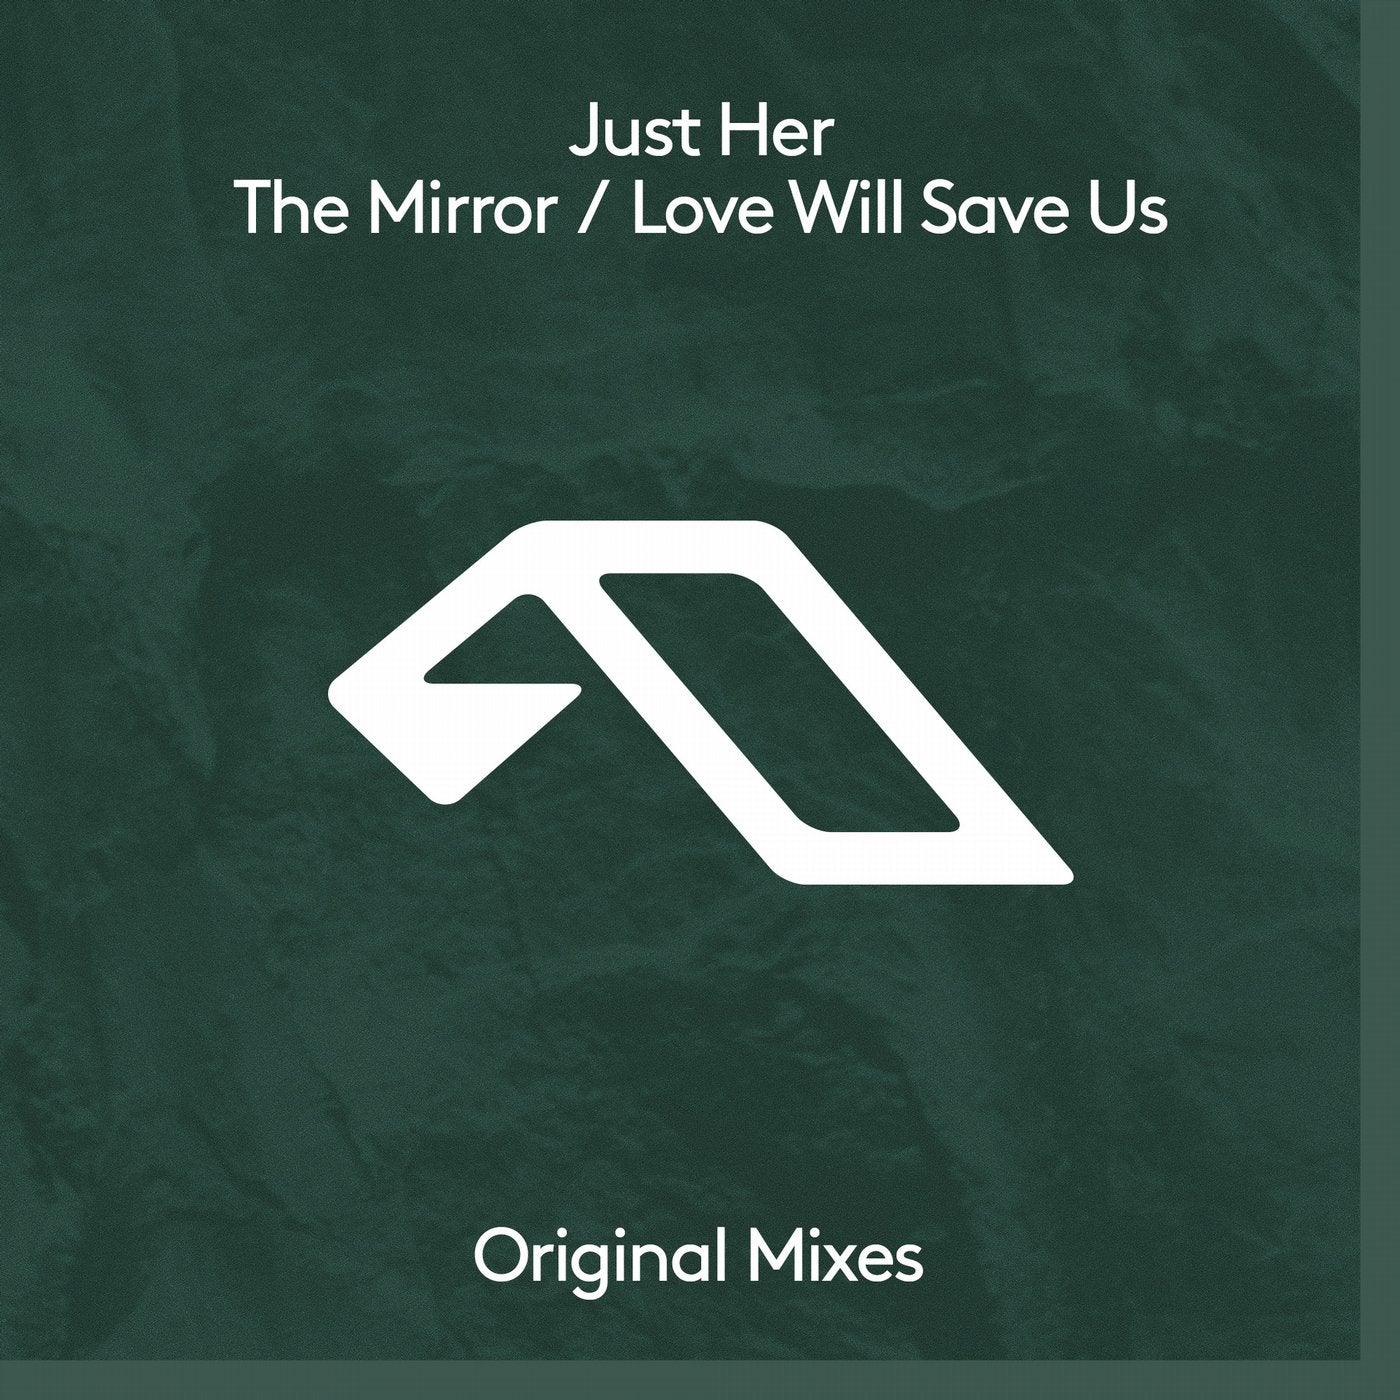 The Mirror / Love Will Save Us